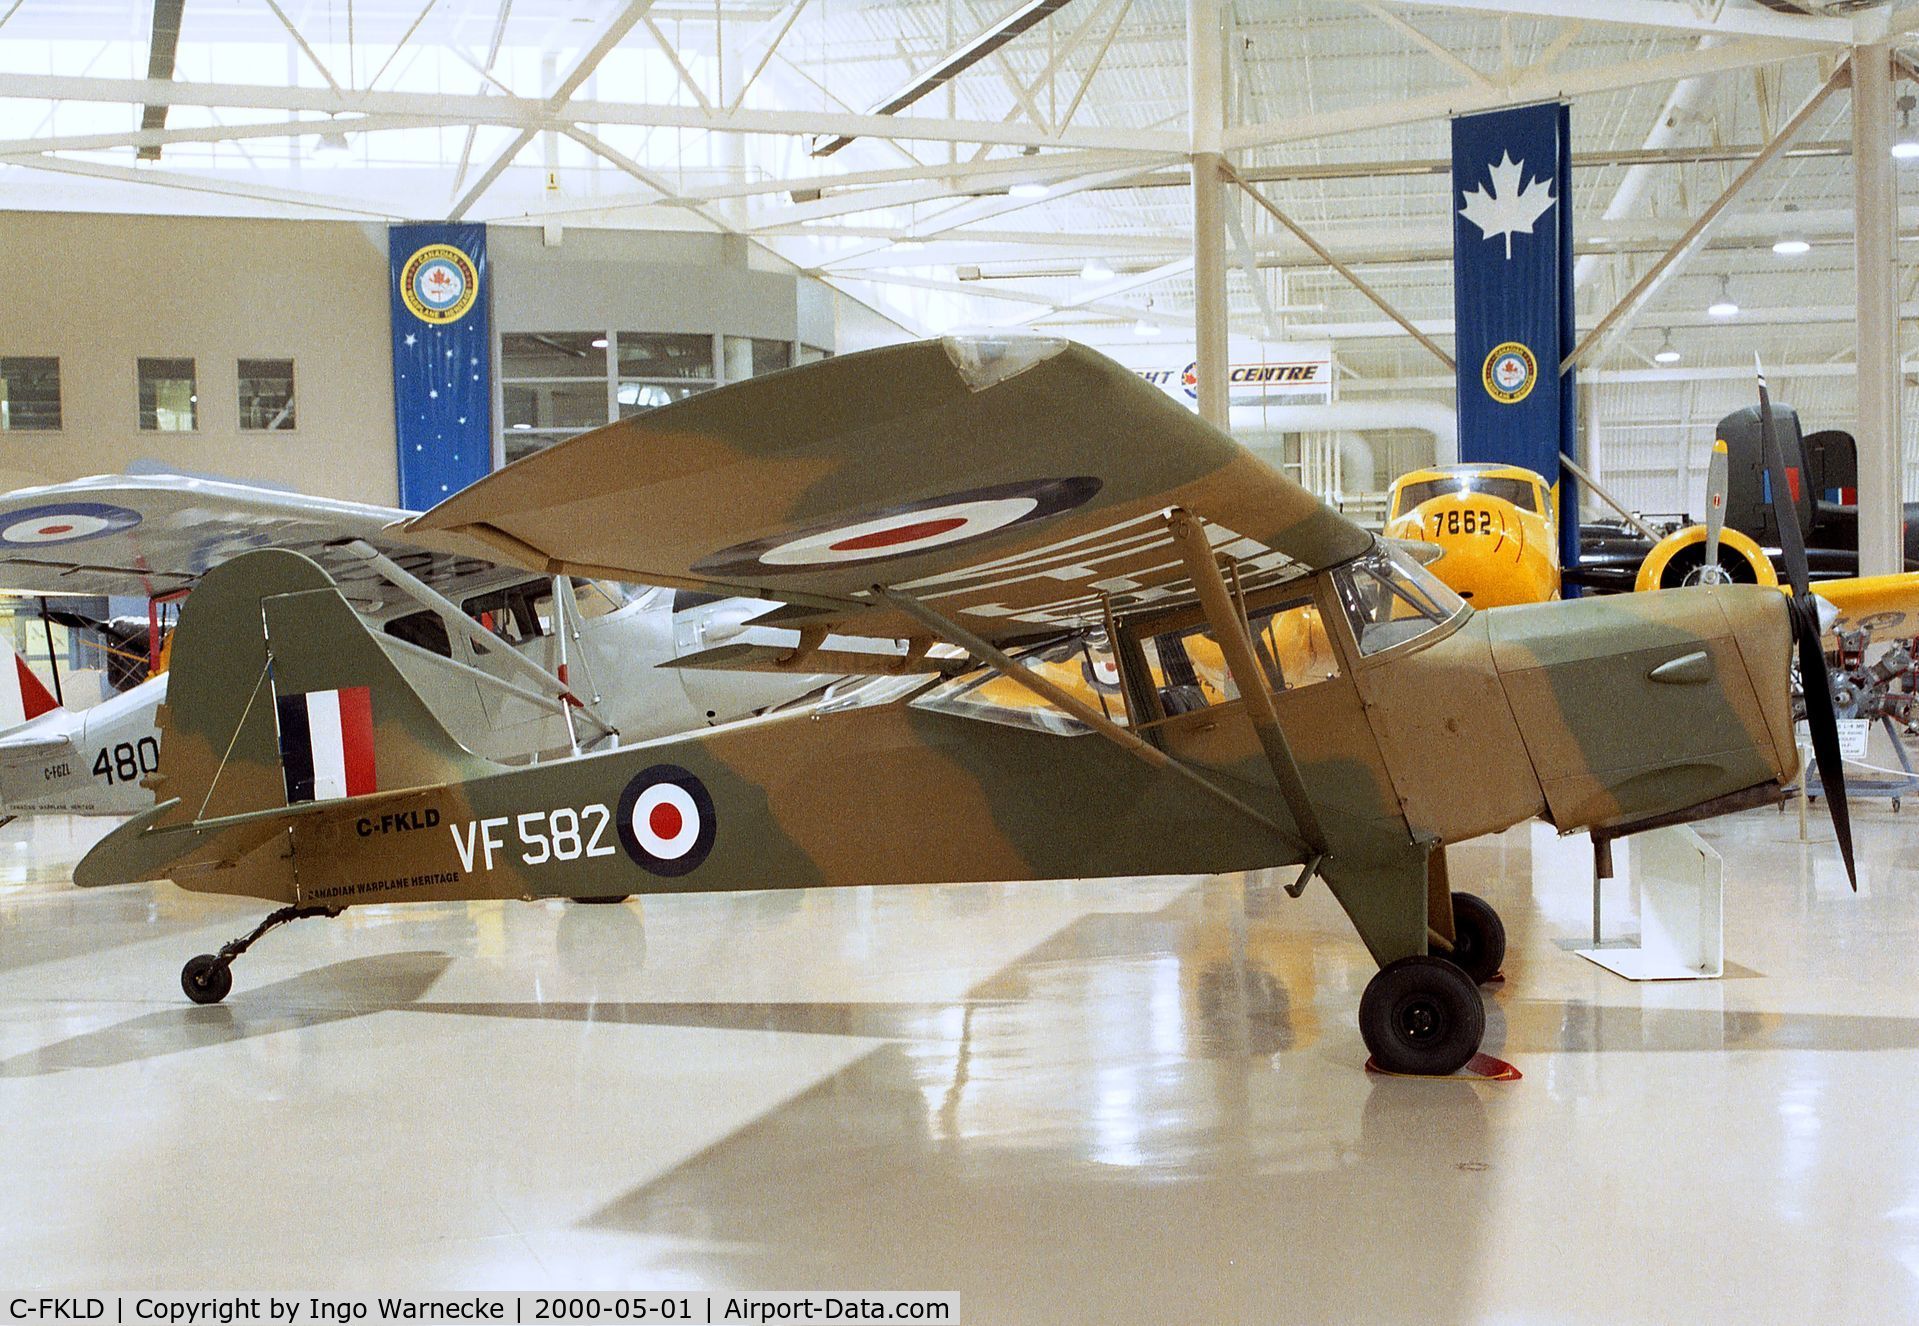 C-FKLD, 1946 Beagle A-61 Terrier 1 C/N 140 ES, Beagle-Auster A.61 Terrier at the Canadian Warplane Heritage Museum, Hamilton Ontario